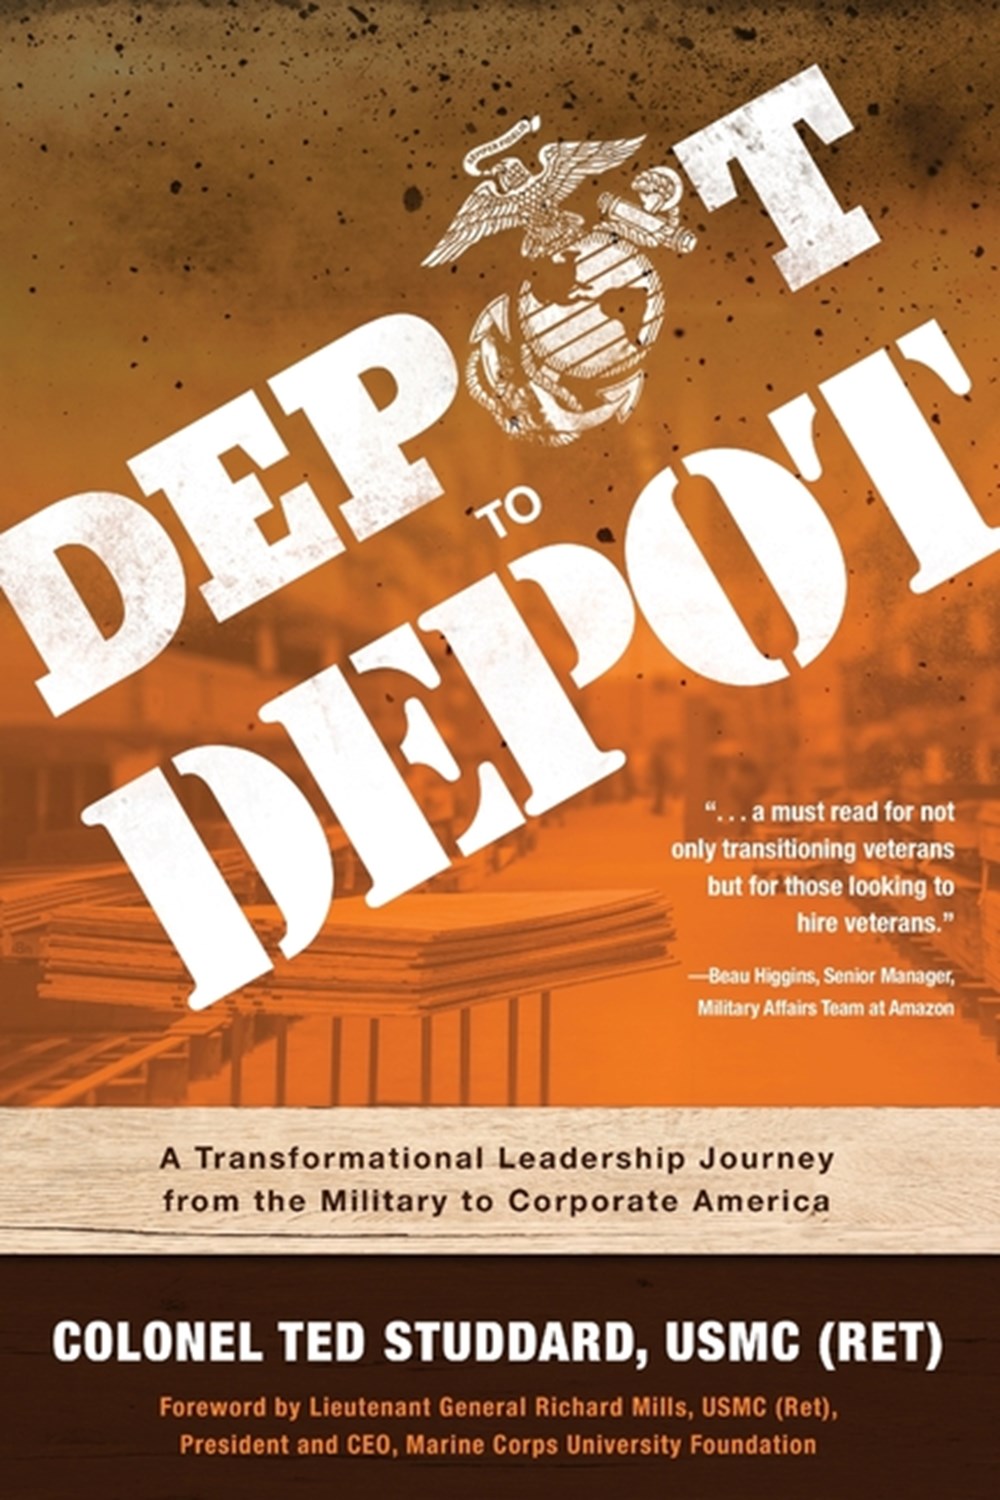 Depot to Depot A Transformational Leadership Journey from the Military to Corporate America